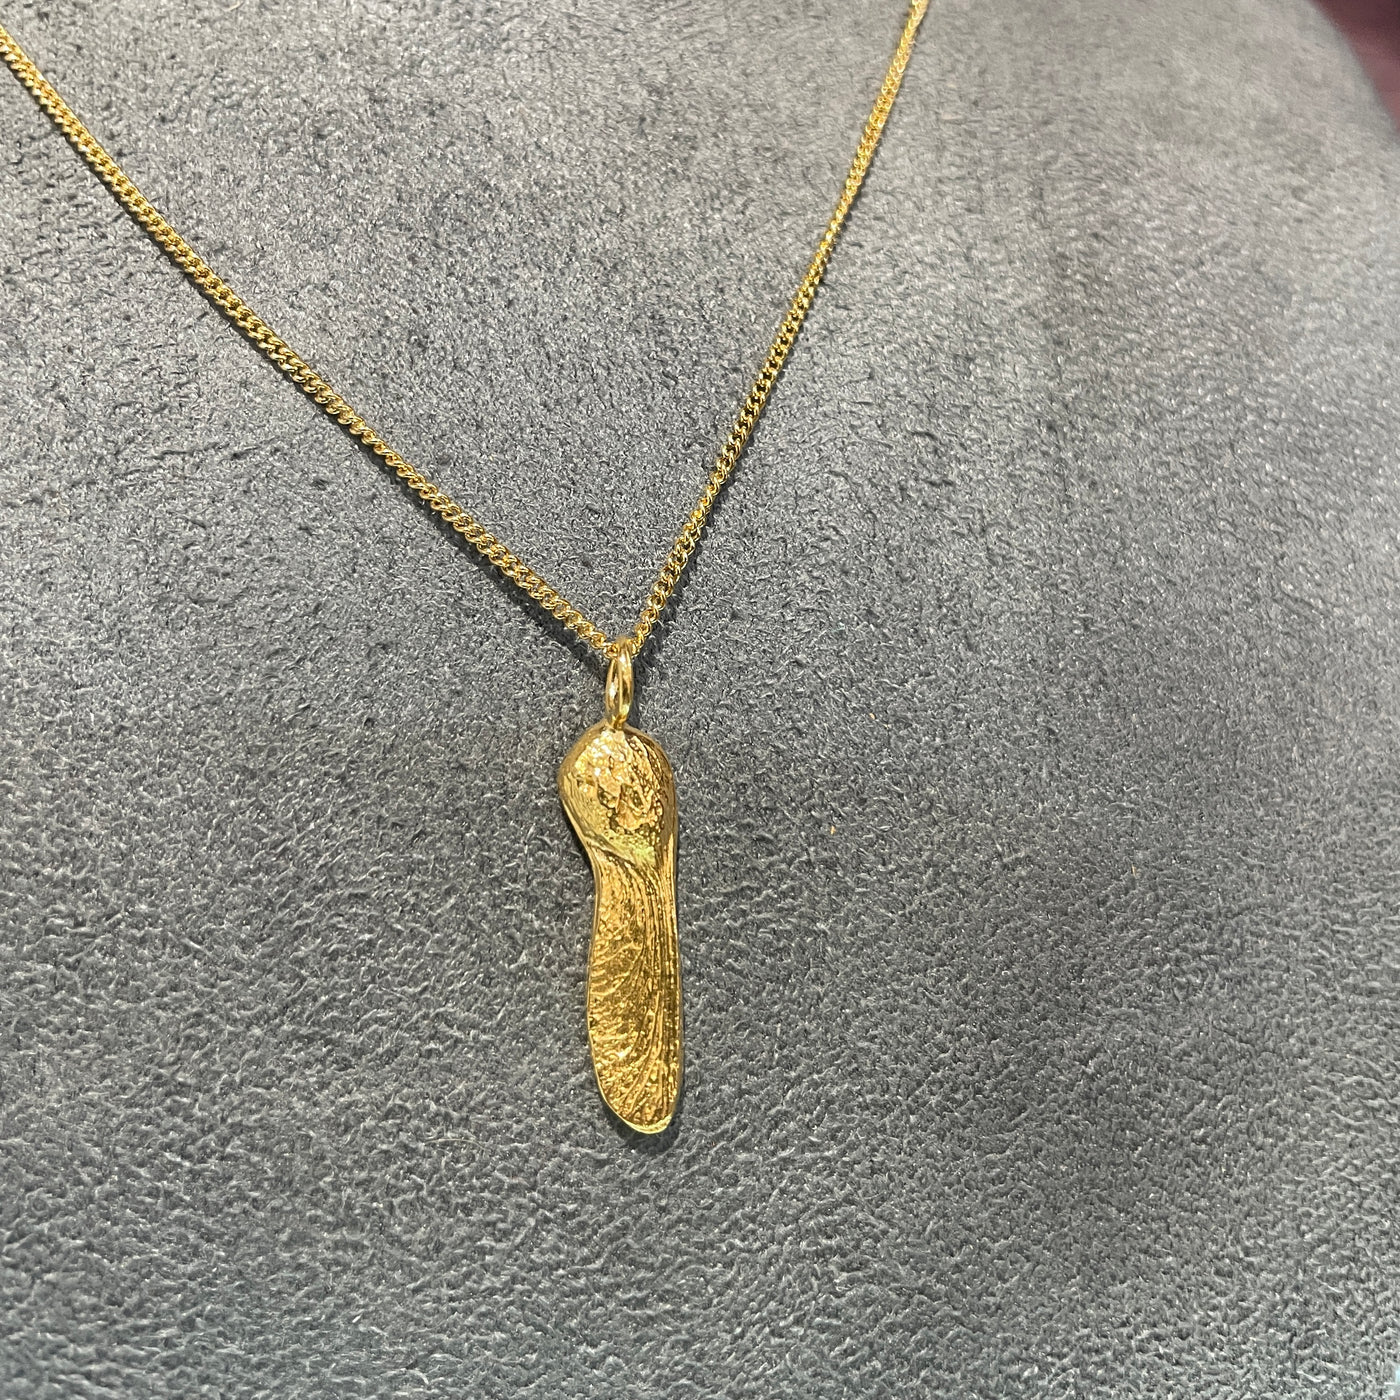 A gold single sycamore seed pendant from Sycamore Gap Ona gold curb chain  on a grey velvet background. 